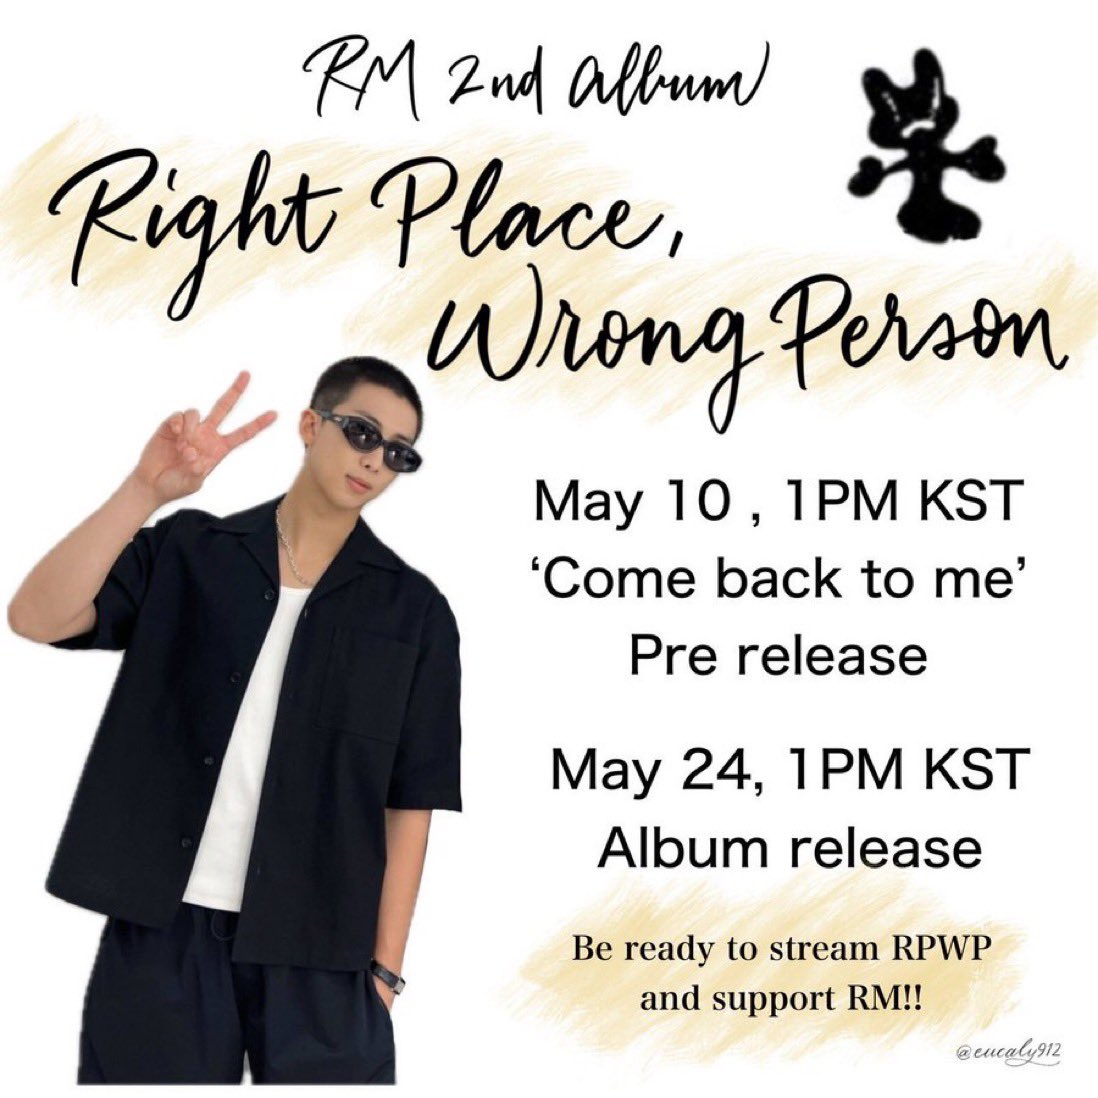 RPWP CONCEPT PHOTO 2
RPWP COMING MAY 24
#RightPlaceWrongPerson
#방탄소년단RM